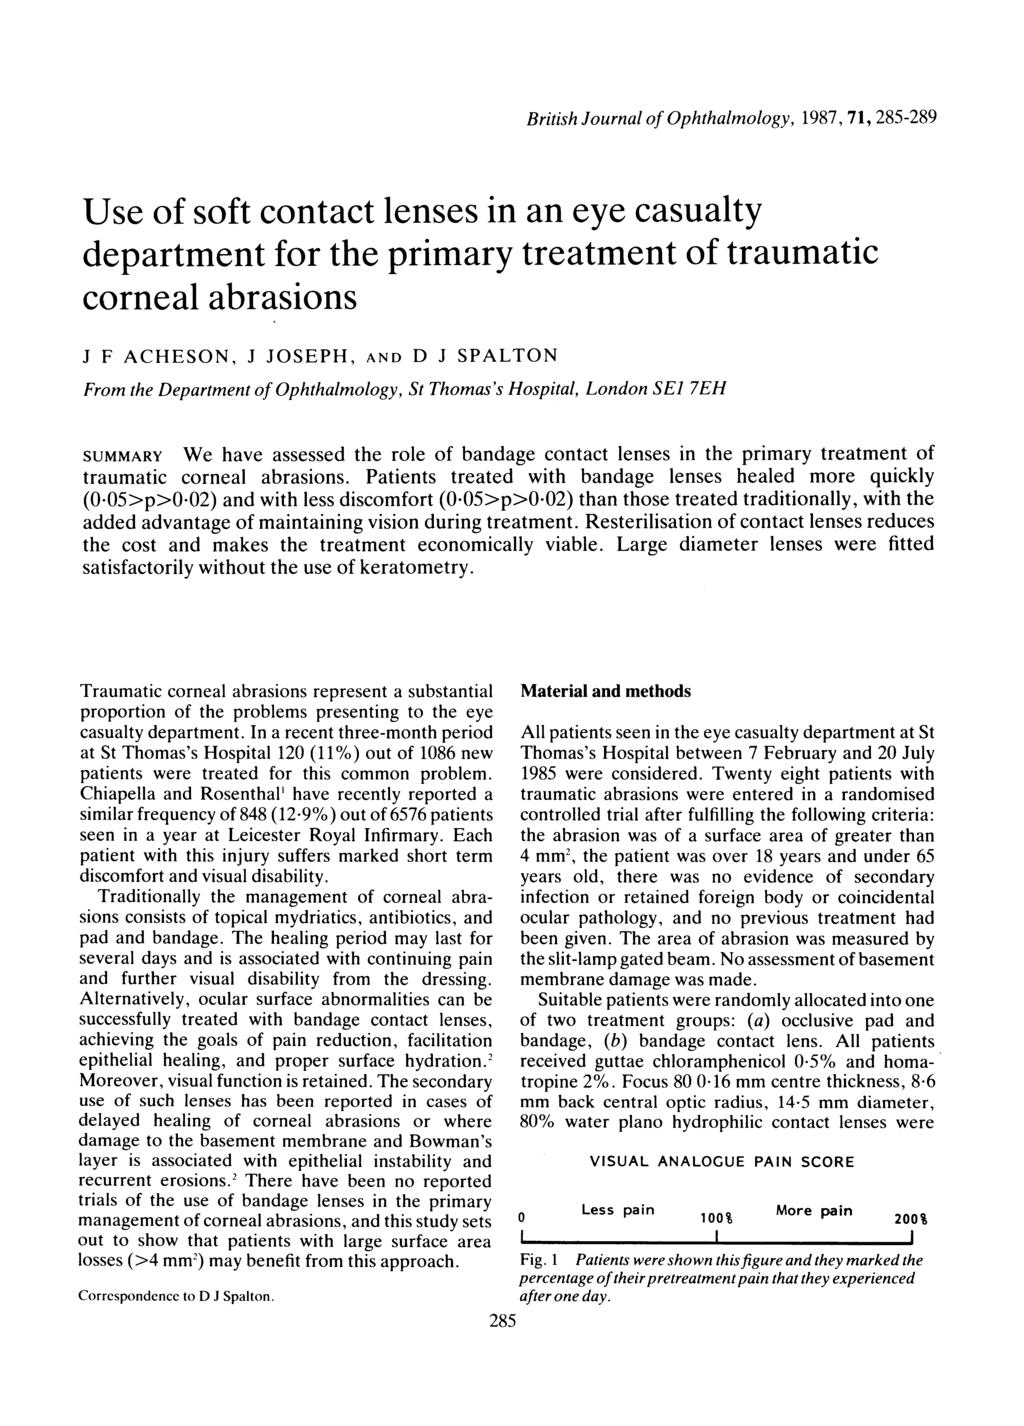 British Journal of Ophthalmology, 1987, 71, 285-289 Use of soft contact lenses in an eye casualty department for the primary treatment of traumatic corneal abrasions J F ACHESON, J JOSEPH, AND D J